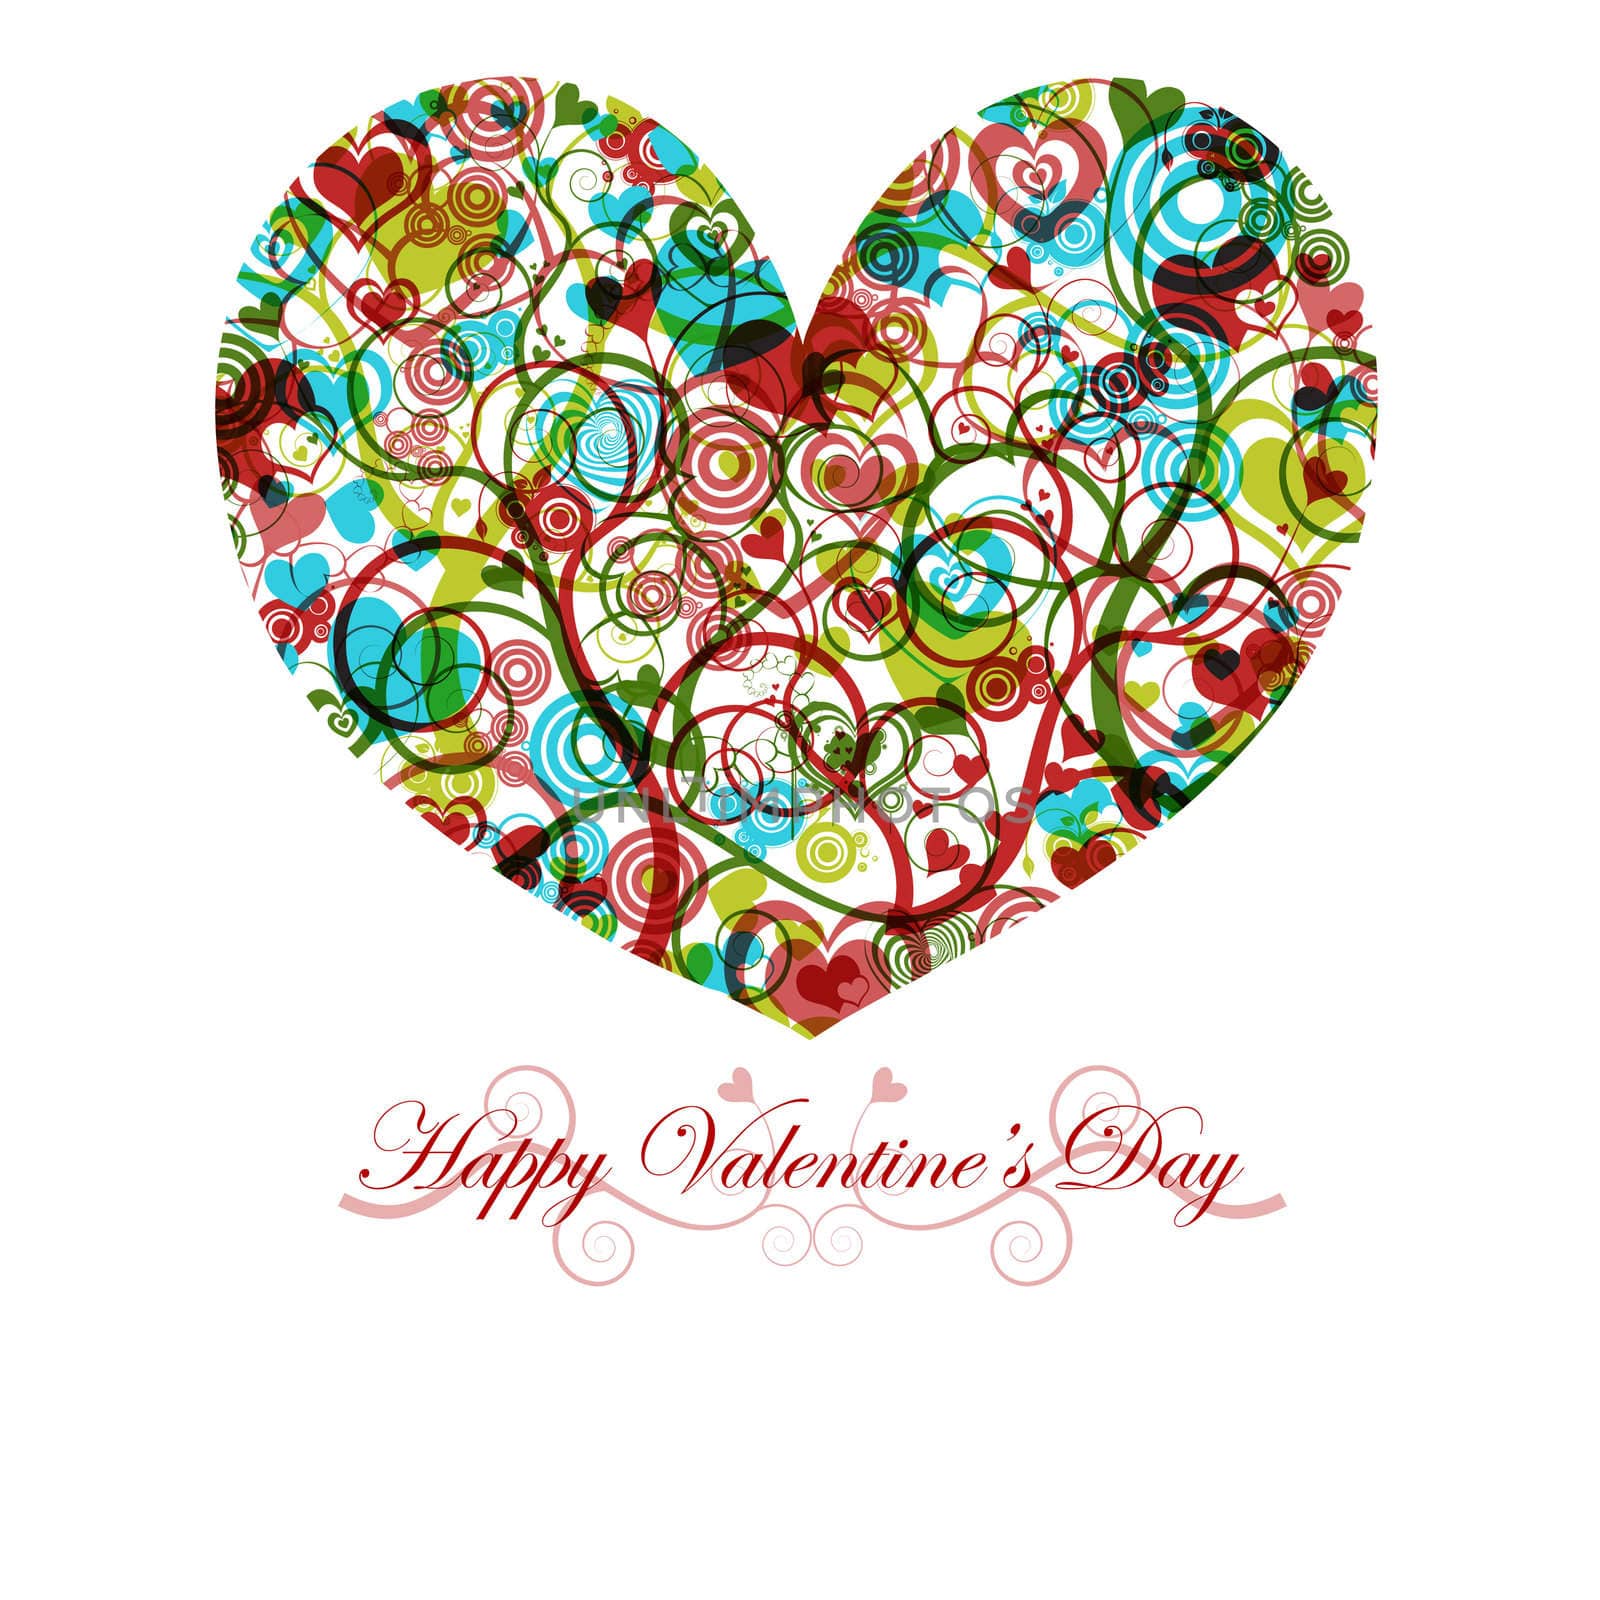 Happy Valentines Day Heart with Colorful Swirls by Davidgn